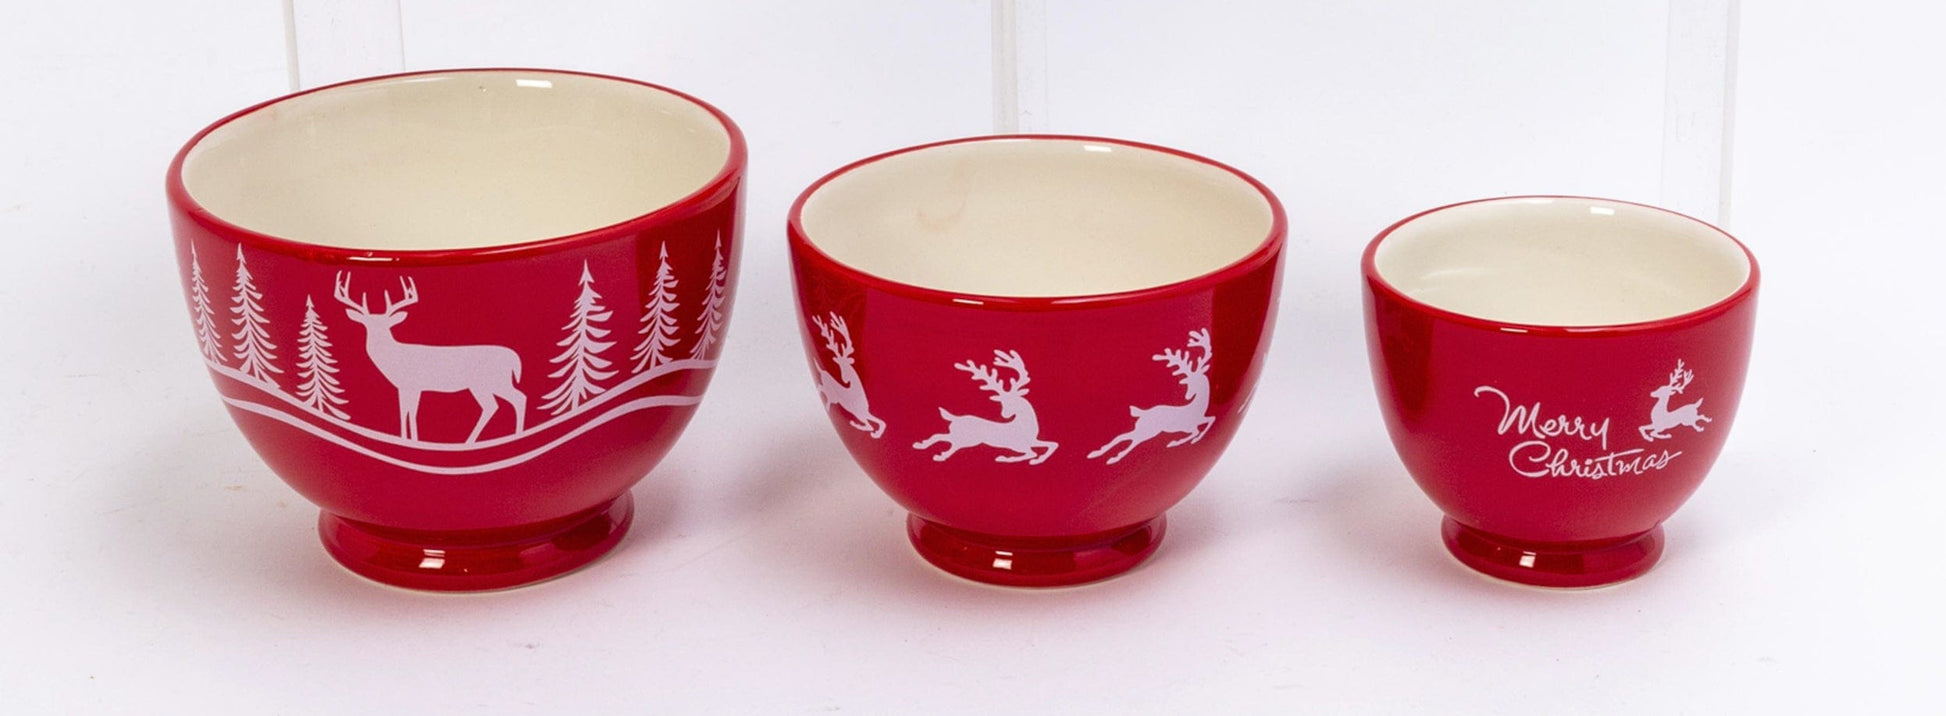 Dolomite Holiday Bowls - Set of 3 - Reindeer - Shelburne Country Store